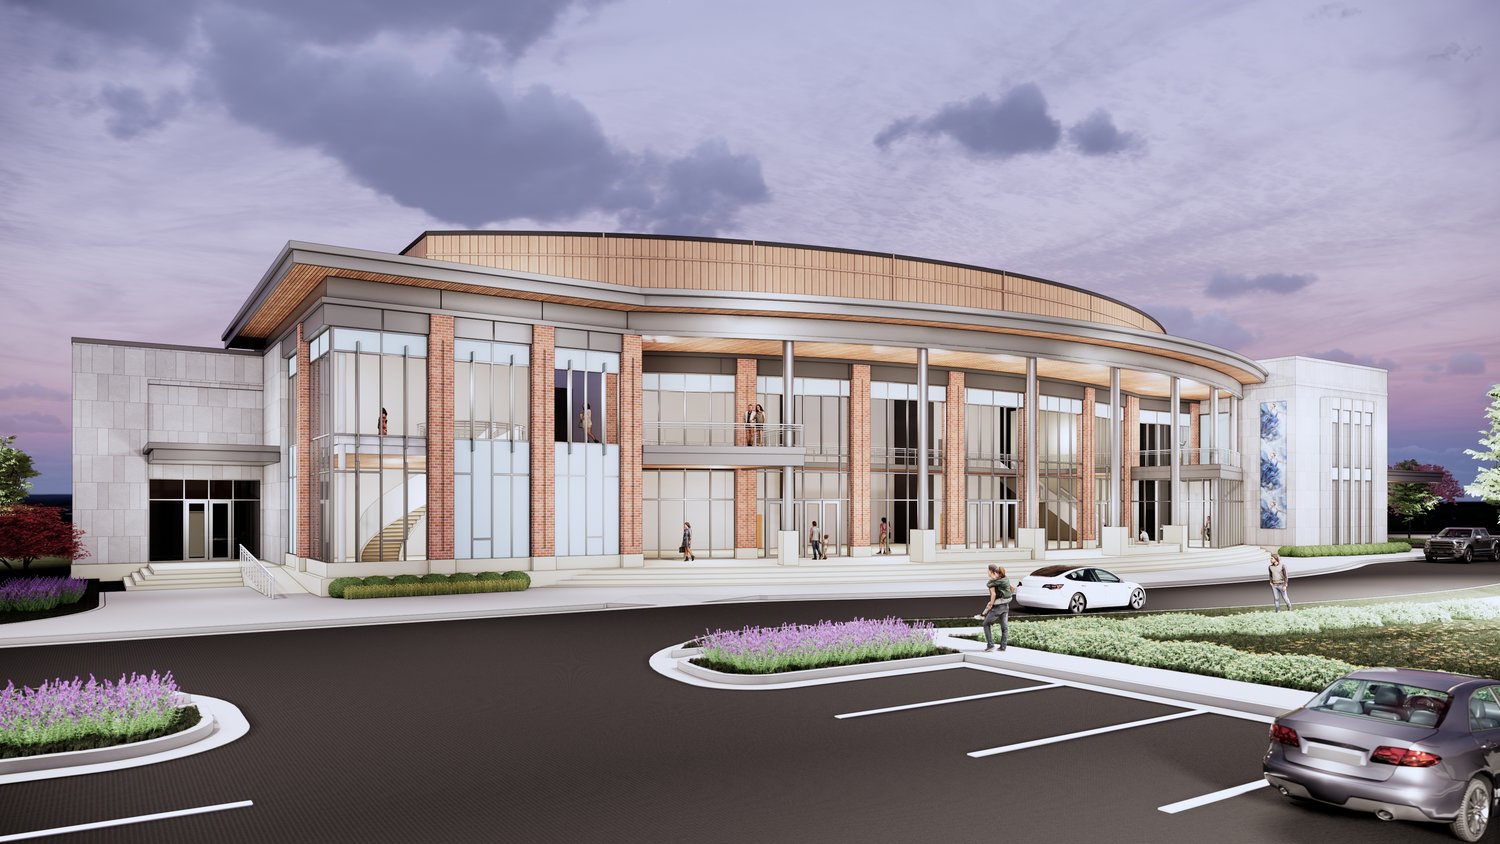 A conceptual rendering shows what Ridgeland’s planned performing arts center could look like.